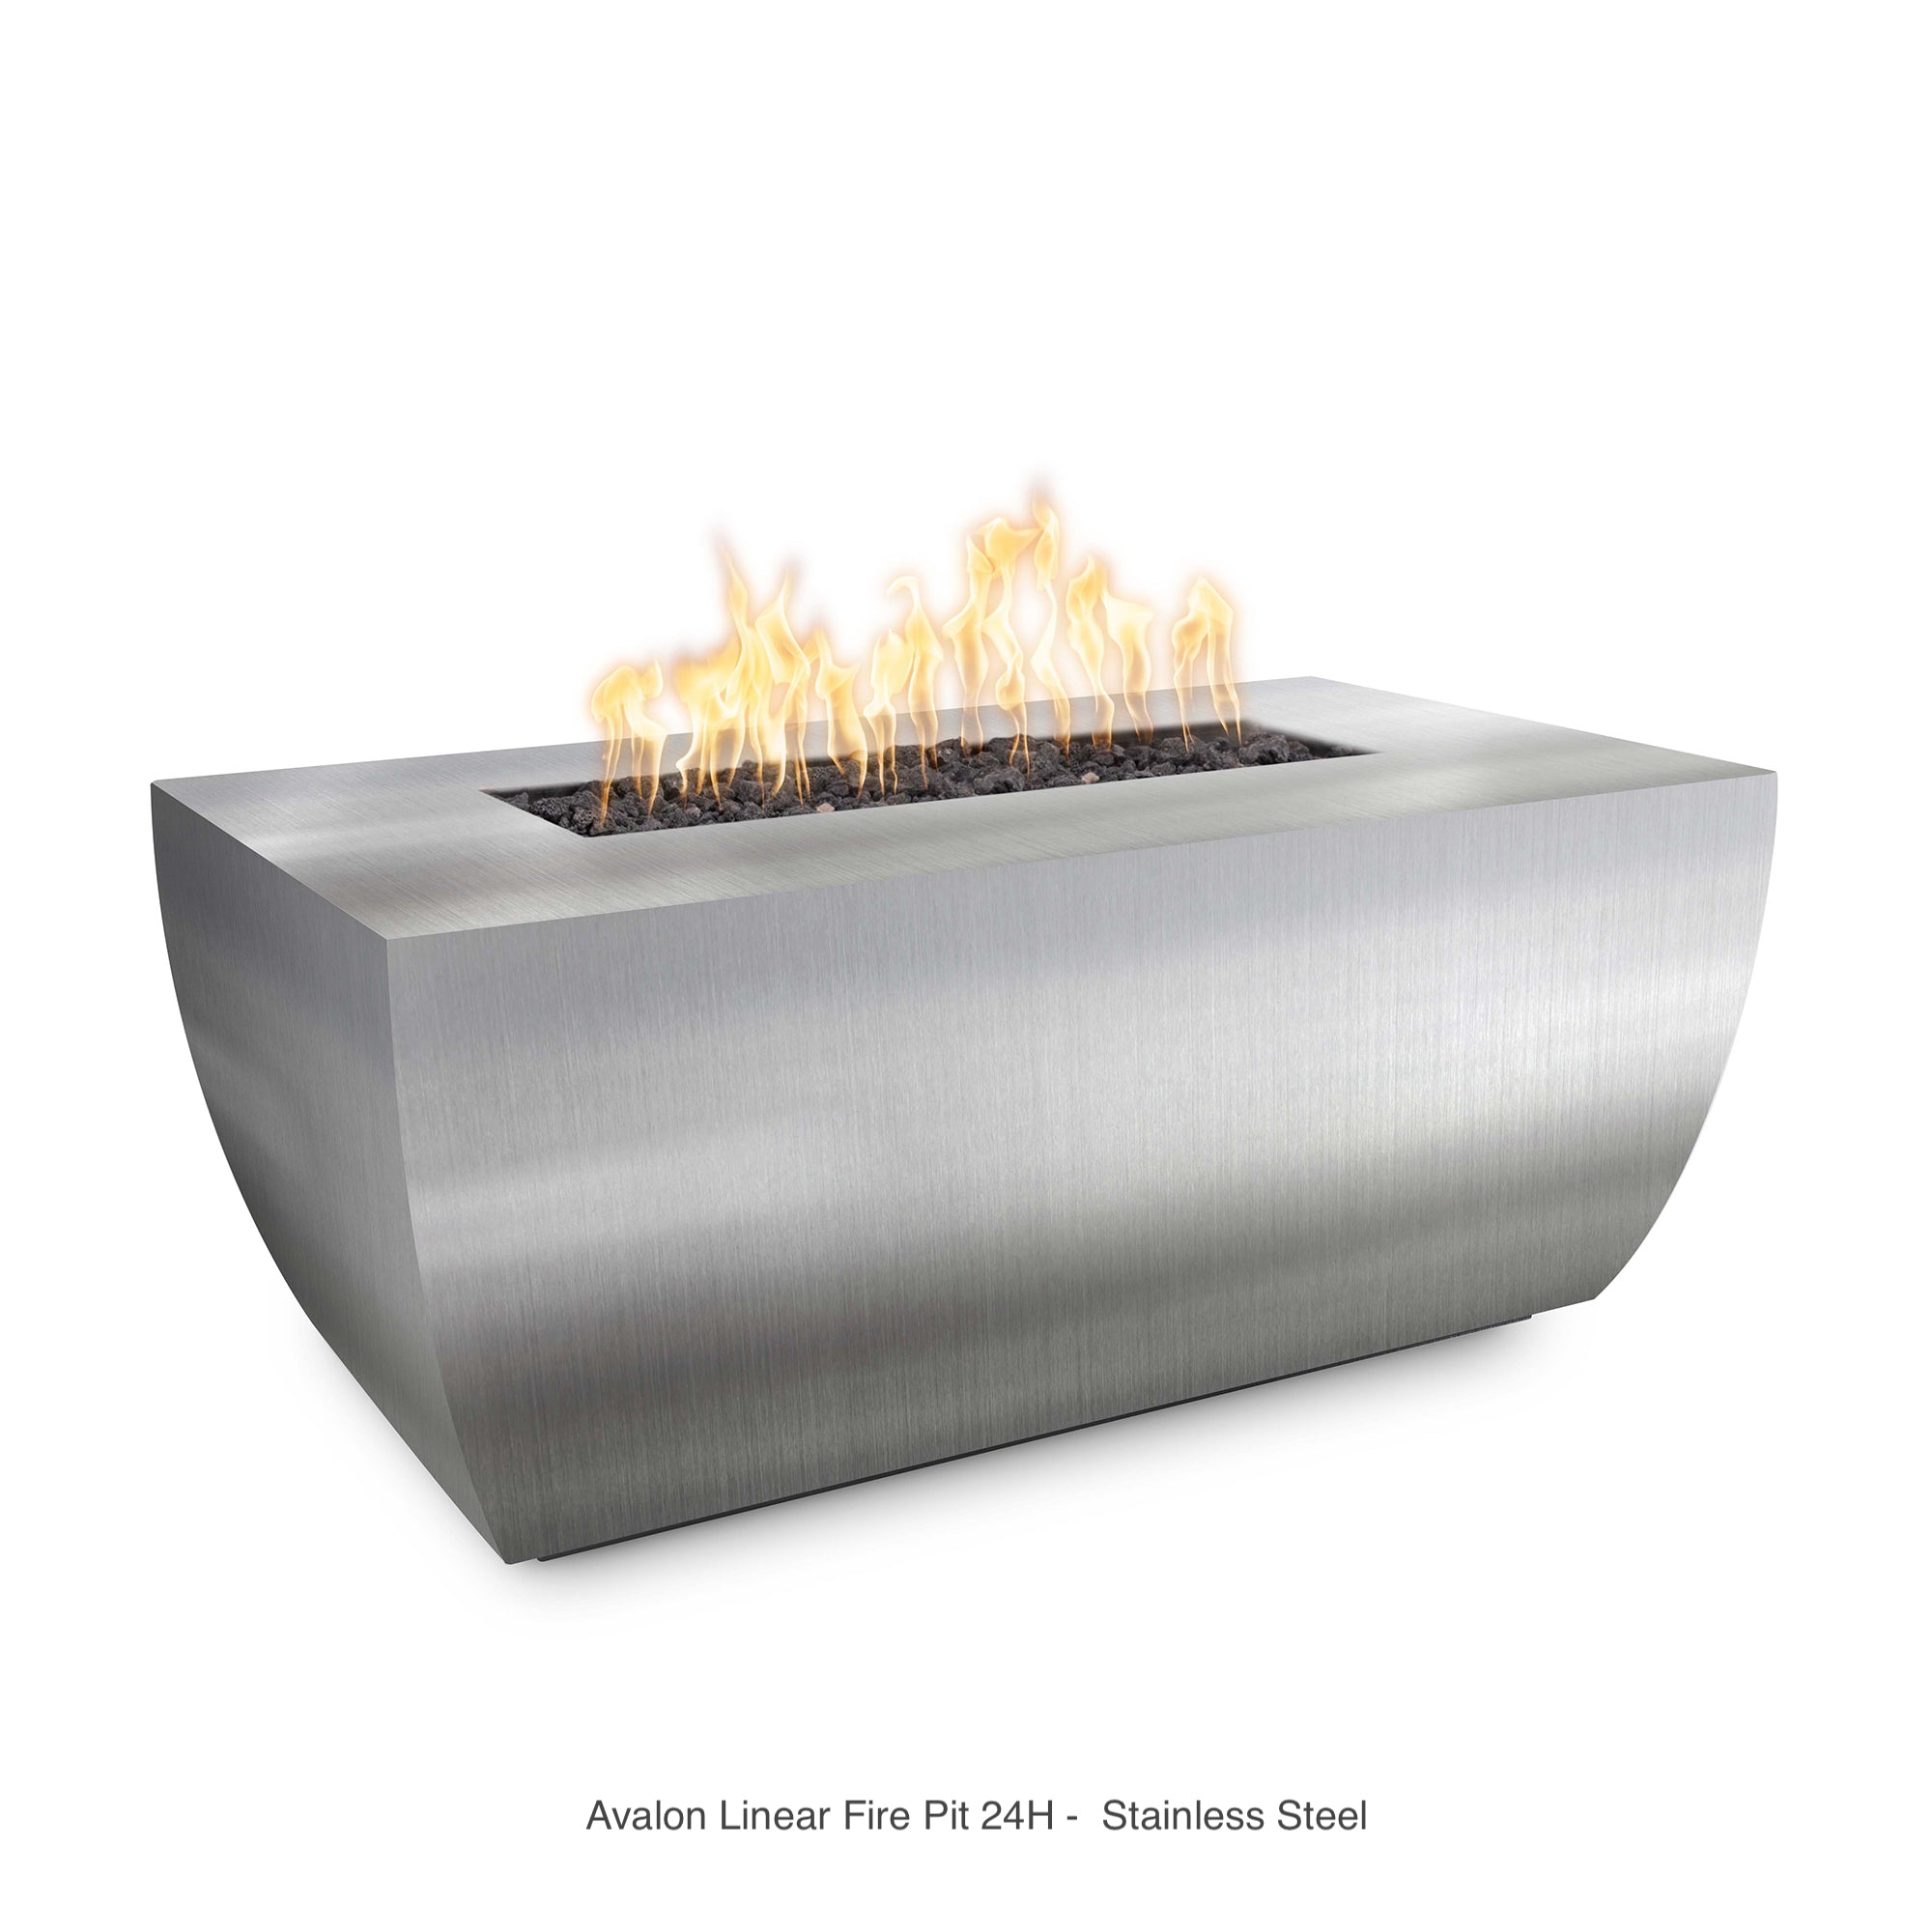 The Outdoor Plus Fire Features The Outdoor Plus 48", 60", 72", 84" Rectangular Avalon Hammered Copper Fire Pit / OPT-AVLCPRxx24, OPT-AVLCPRxx24FSML, OPT-AVLCPRxx24FSEN, OPT-AVLCPRxx24E12V, OPT-AVLCPRxx24EKIT